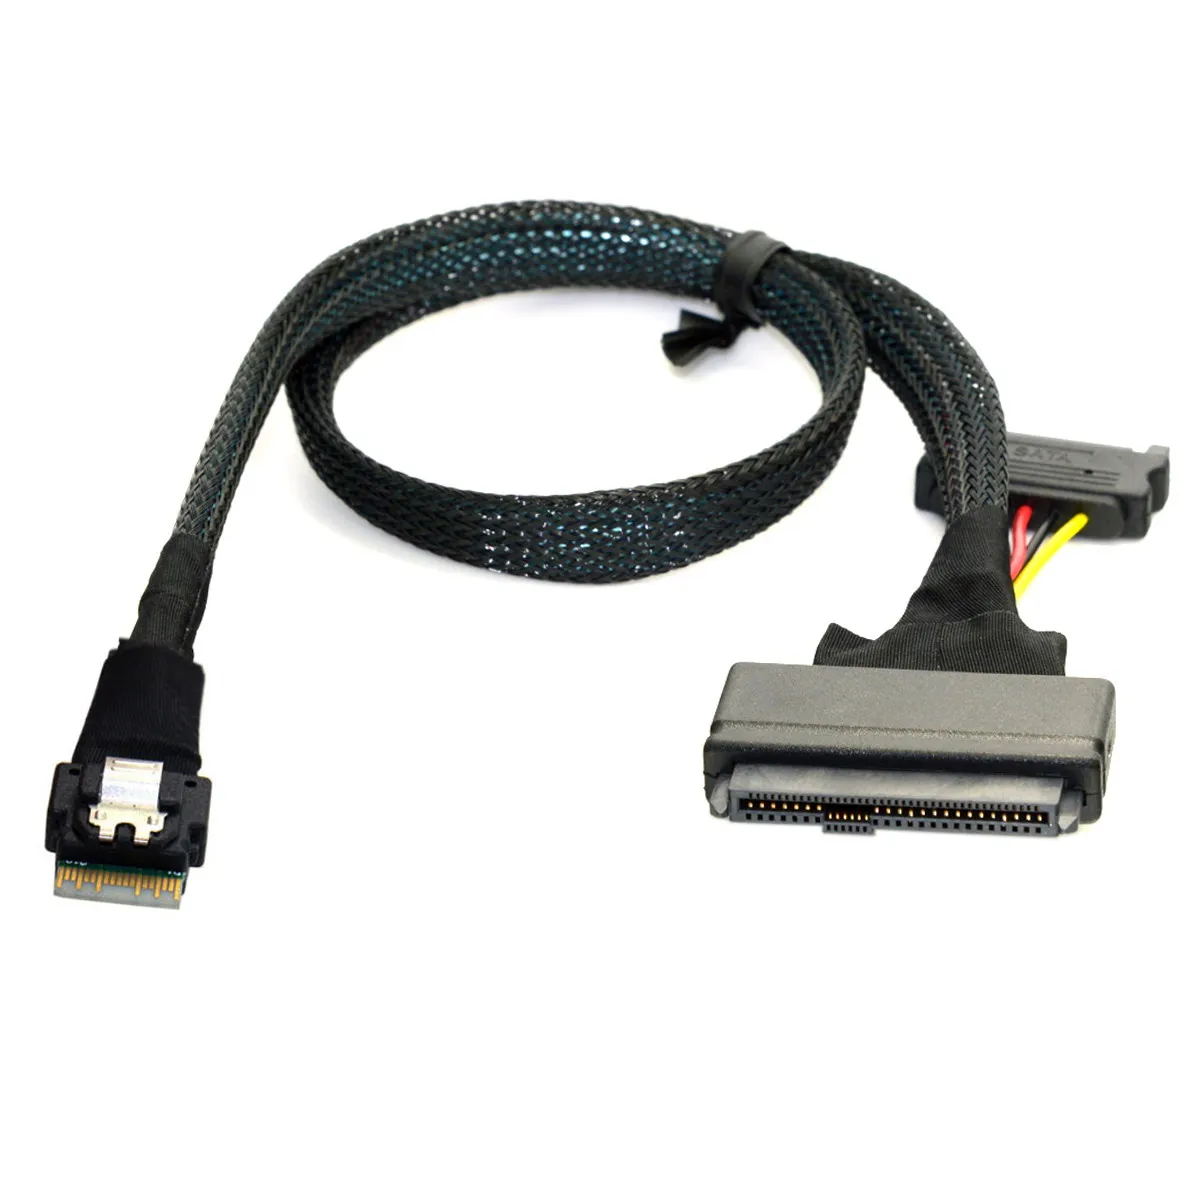 

CY Slimline SFF-8654 4i NVME PCIe SSD Cable for Mainboard SSD 750 p3600 p3700 M.2 to U.2 U2 SFF-8639